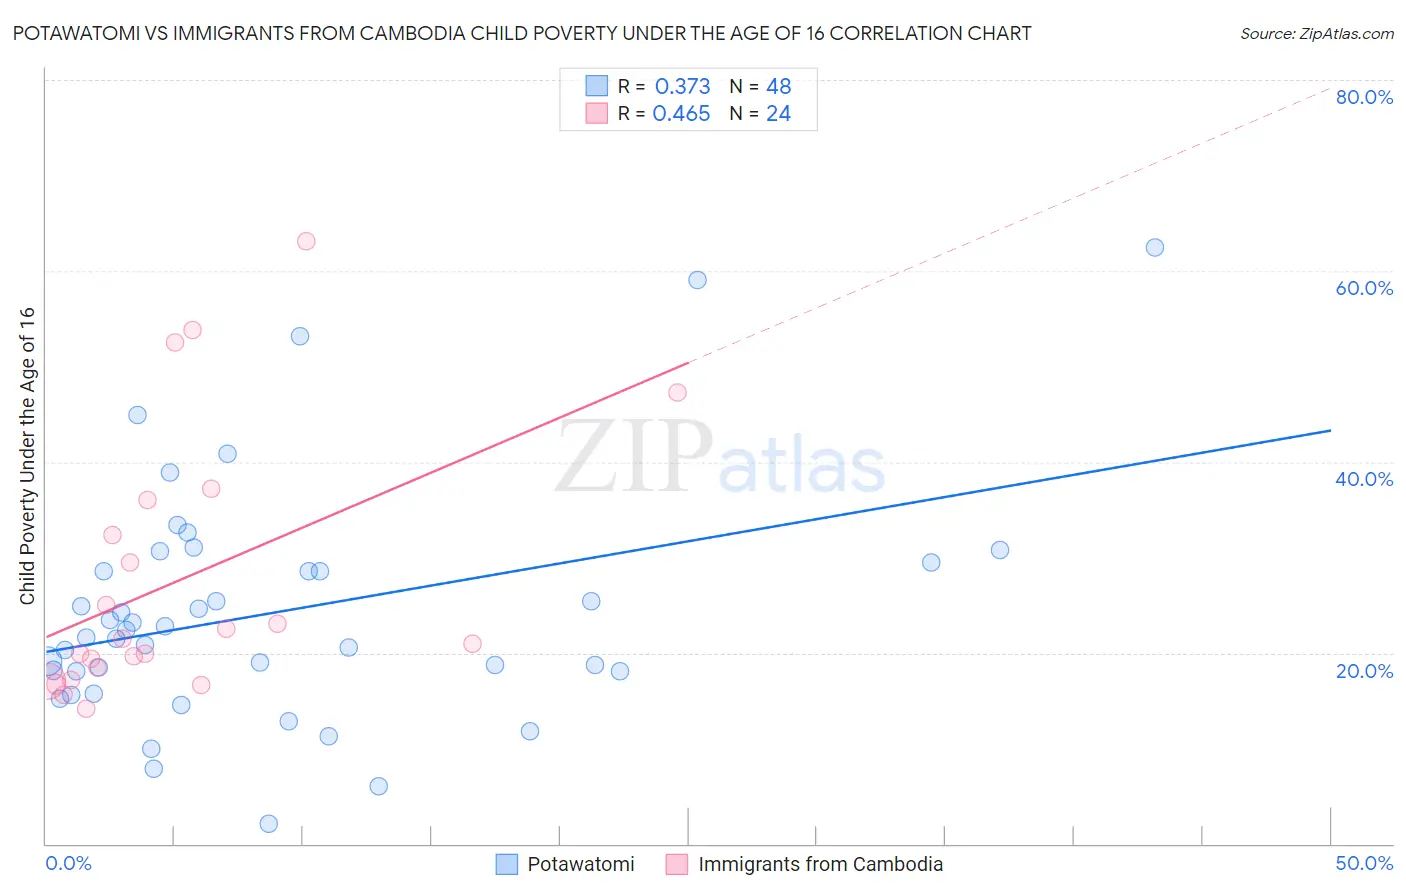 Potawatomi vs Immigrants from Cambodia Child Poverty Under the Age of 16